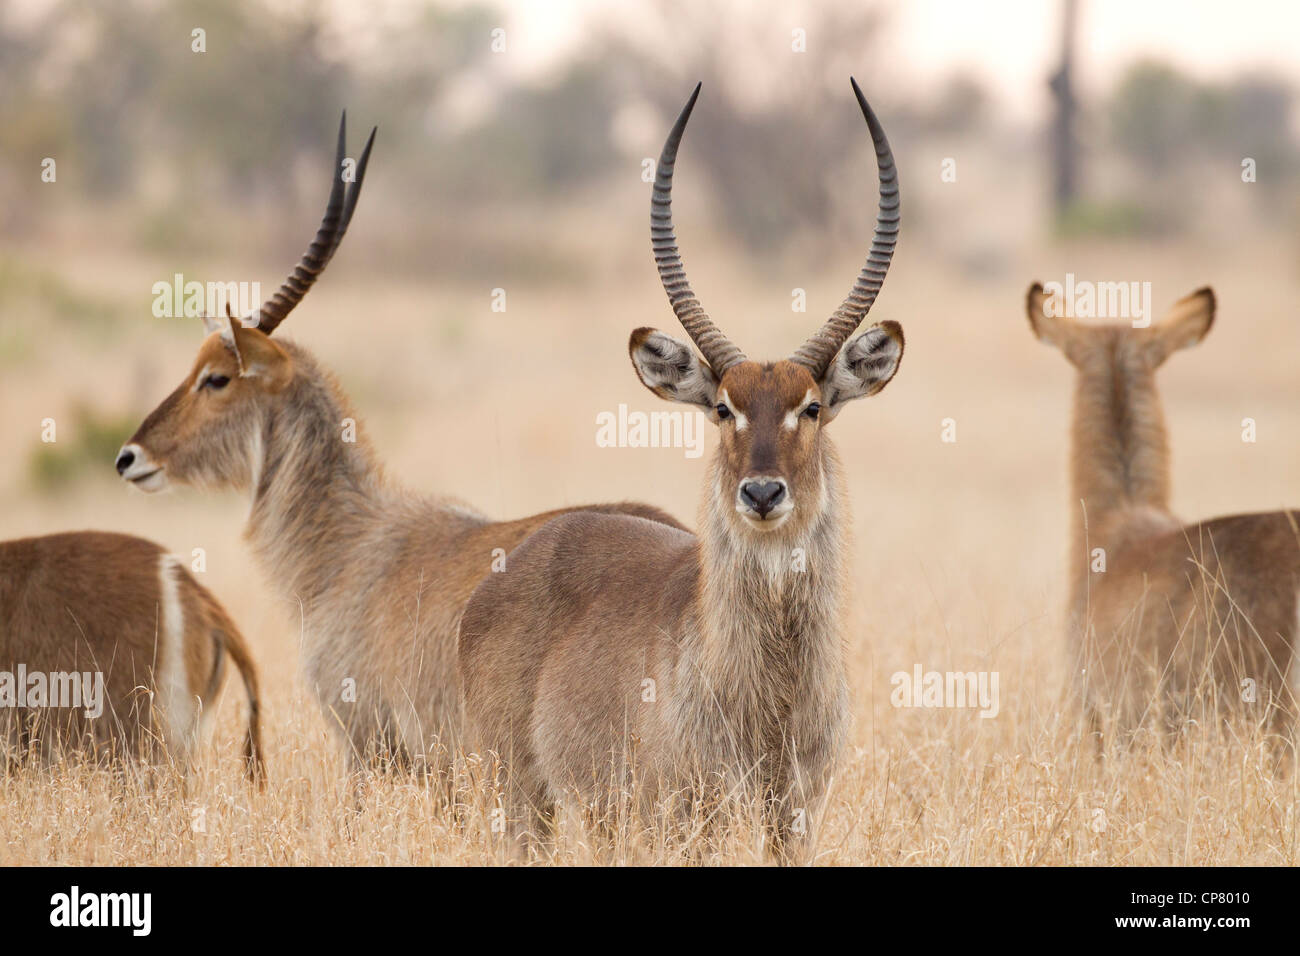 Male common Waterbuck (Kobus ellipsiprymnus) in South Africa's Kruger Park Stock Photo